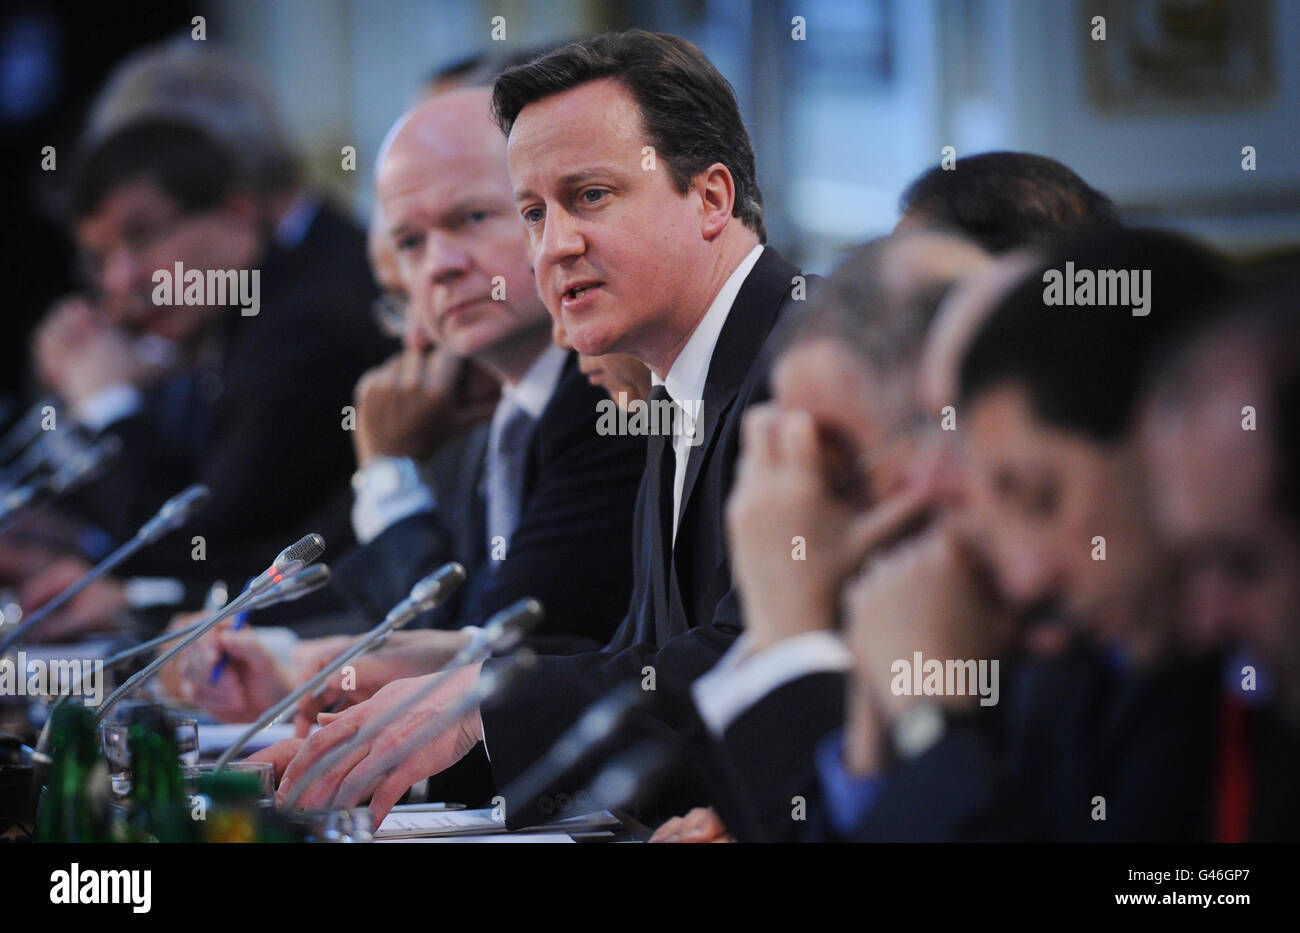 Libya conflict - London conference Stock Photo